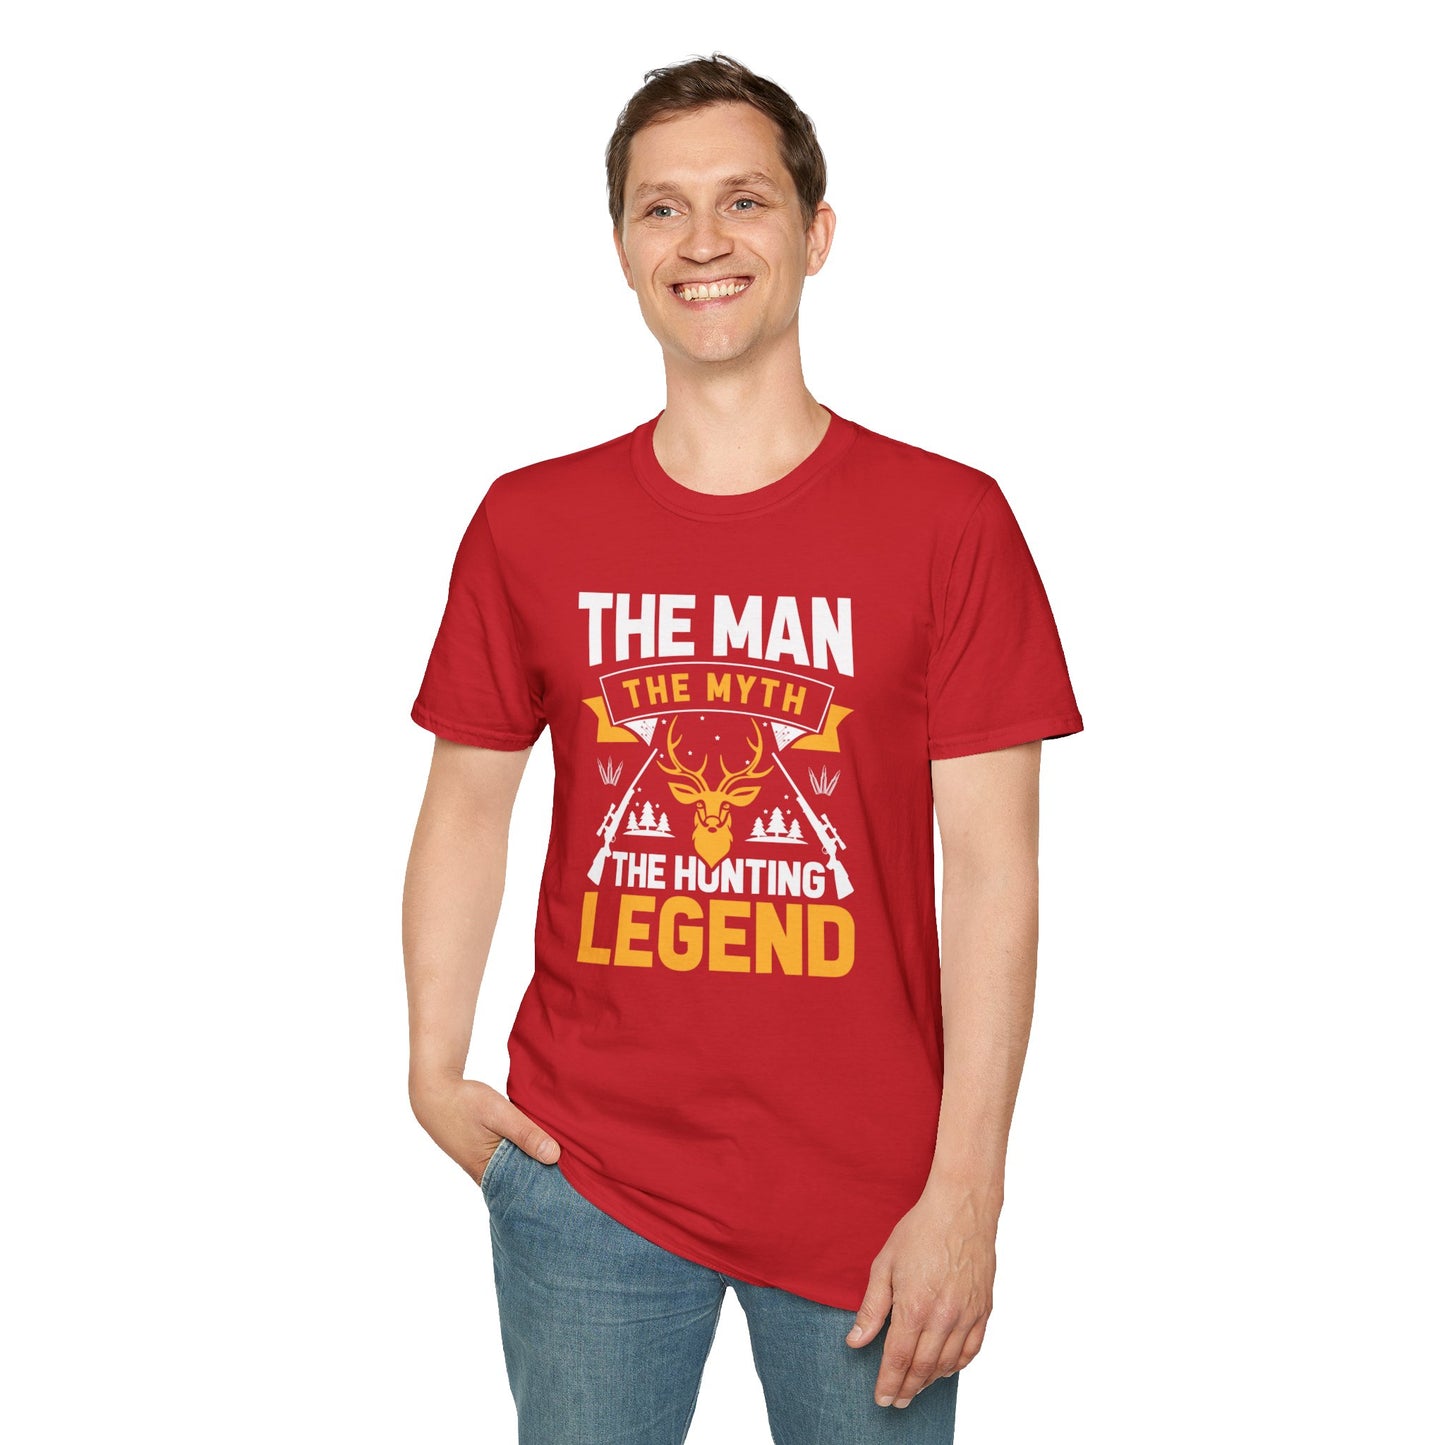 Unleash Your Inner Hunting Legend with 'The Man The Myth The Hunting Legend' T-Shirt!